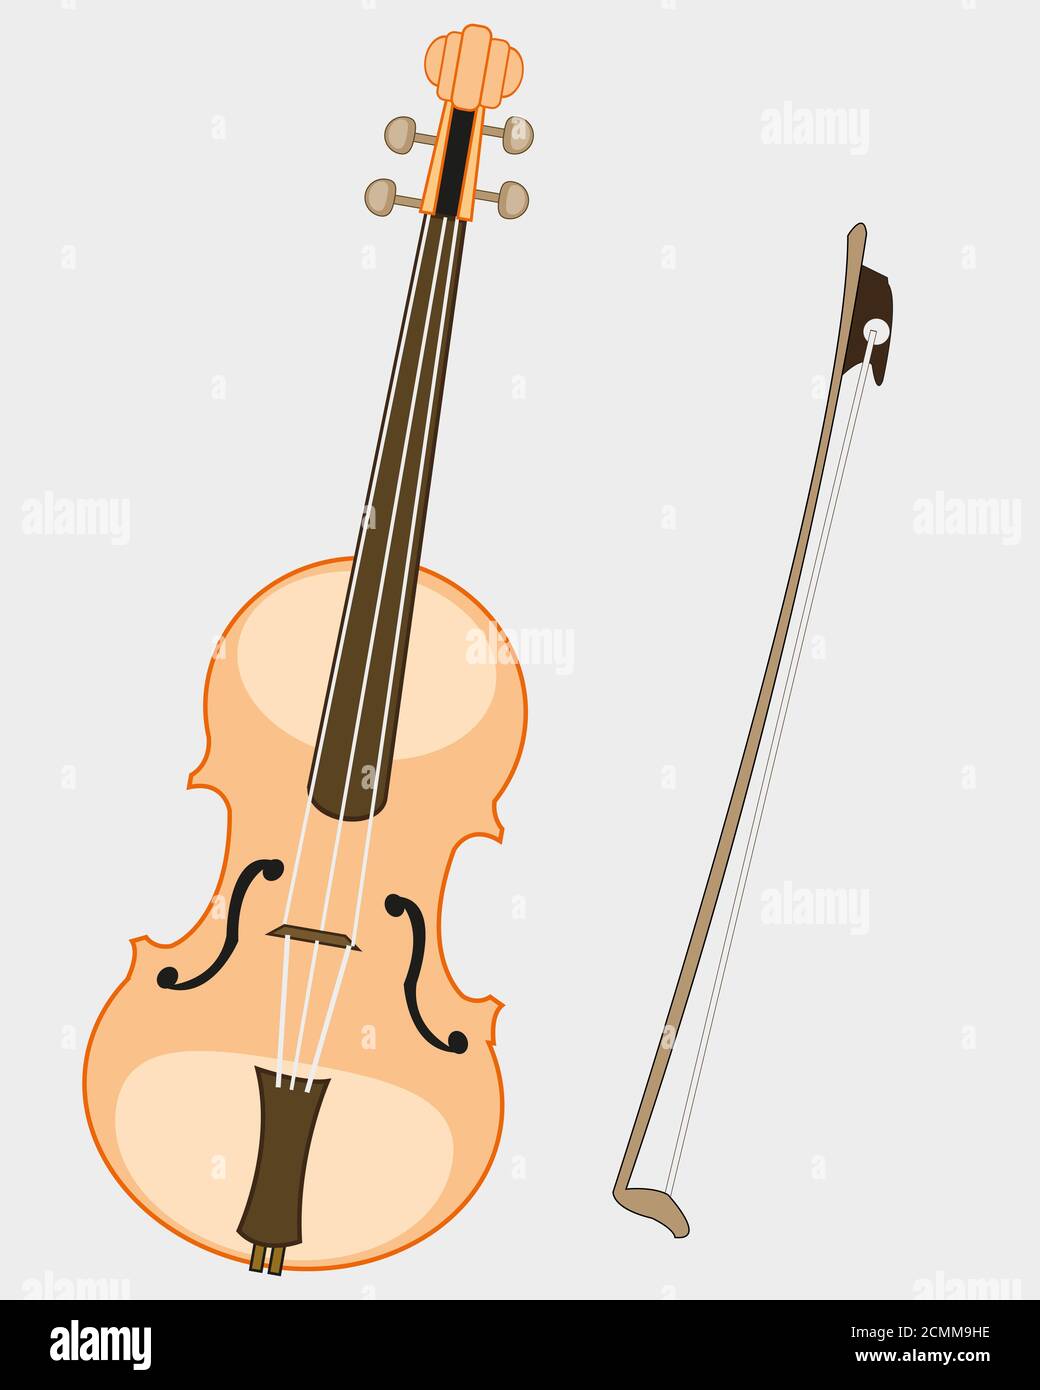 Music instrument violin and joining Stock Photo